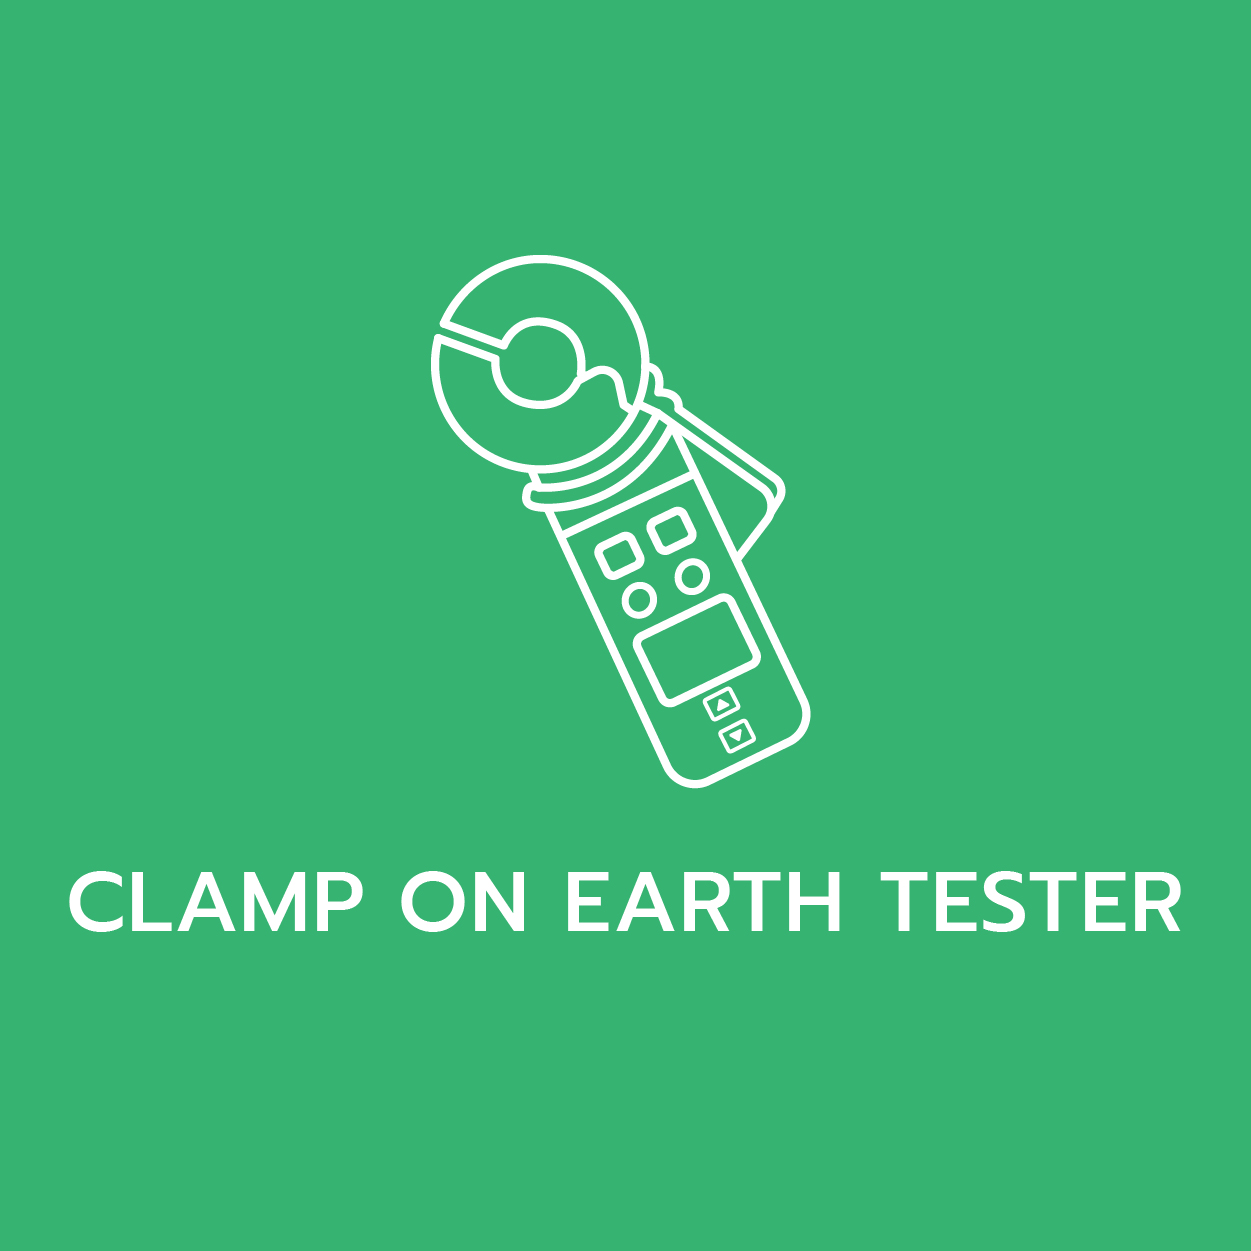 Clamp On Earth Tester ?